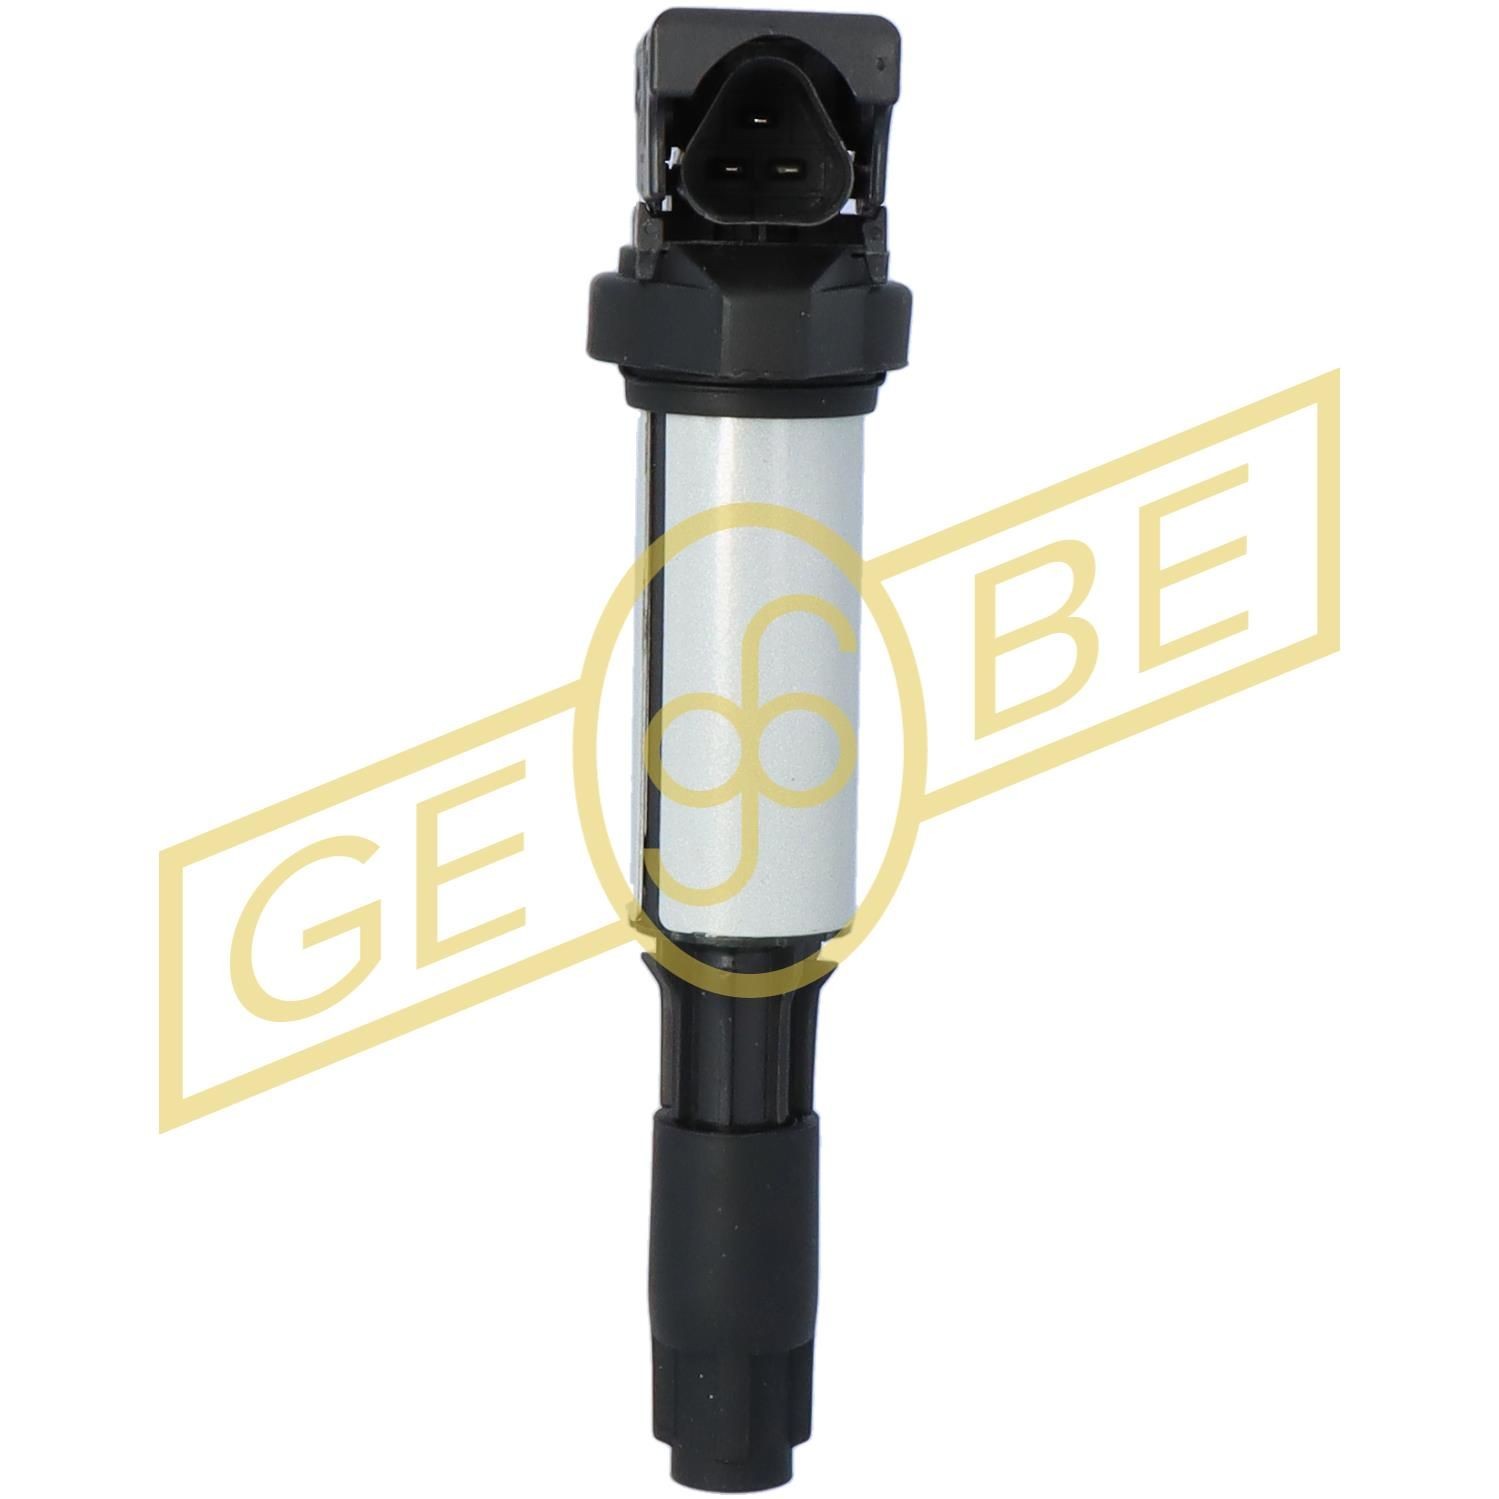 GEBE 945131 Ignition coil 12135A06753